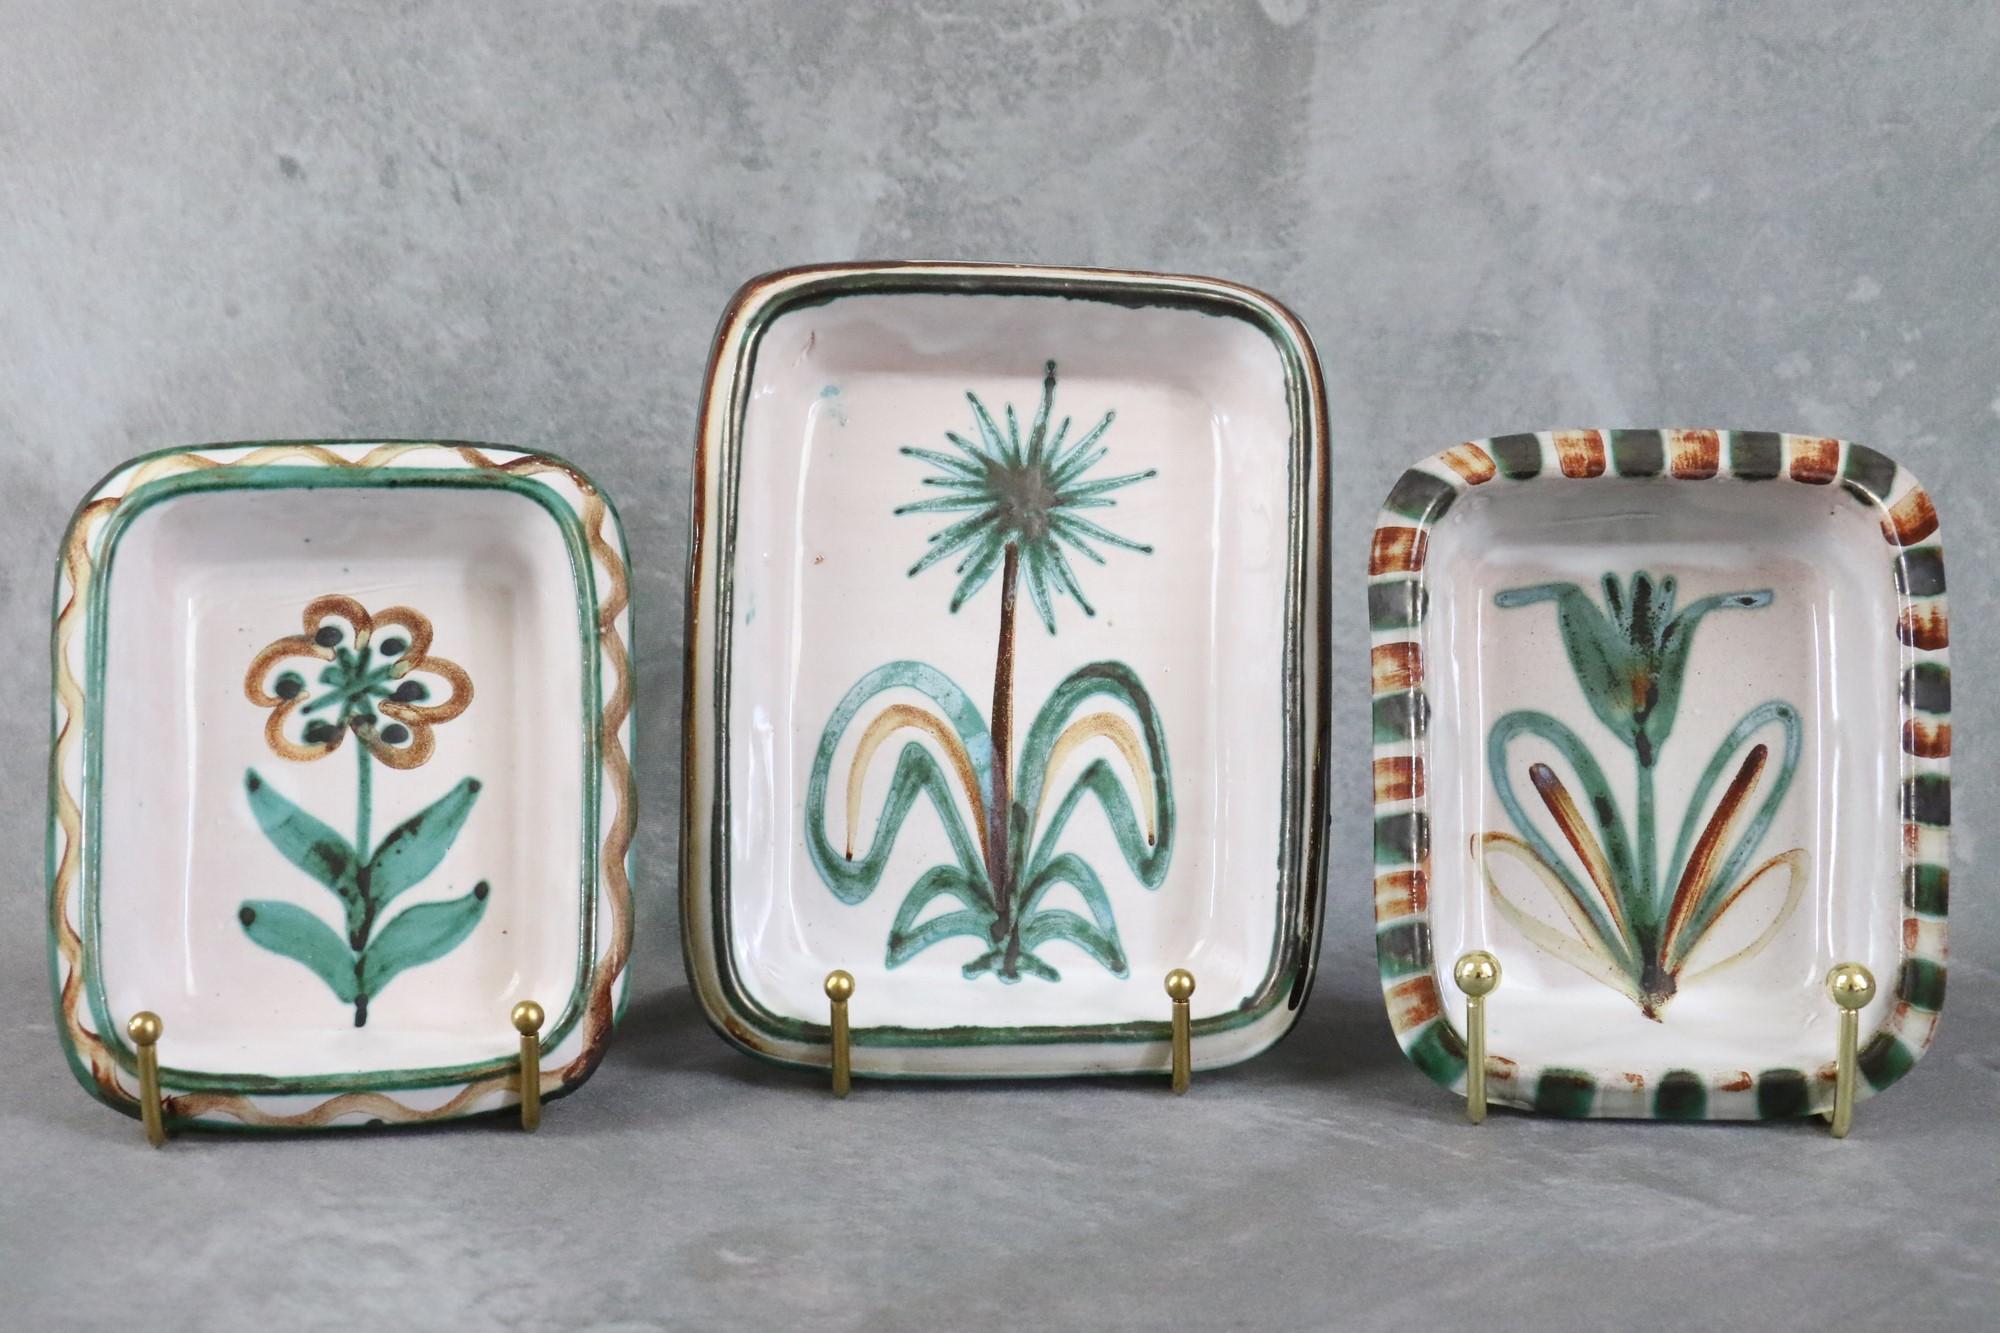 Set of 3 ceramic dishes by Robert Picault, Vallauris, French Ceramic, 1950's

Handmade, they are enameled in green, brown and white colors and are decorated with geometrical and flowers patterns. 
They are in good condition and all are signed.

The